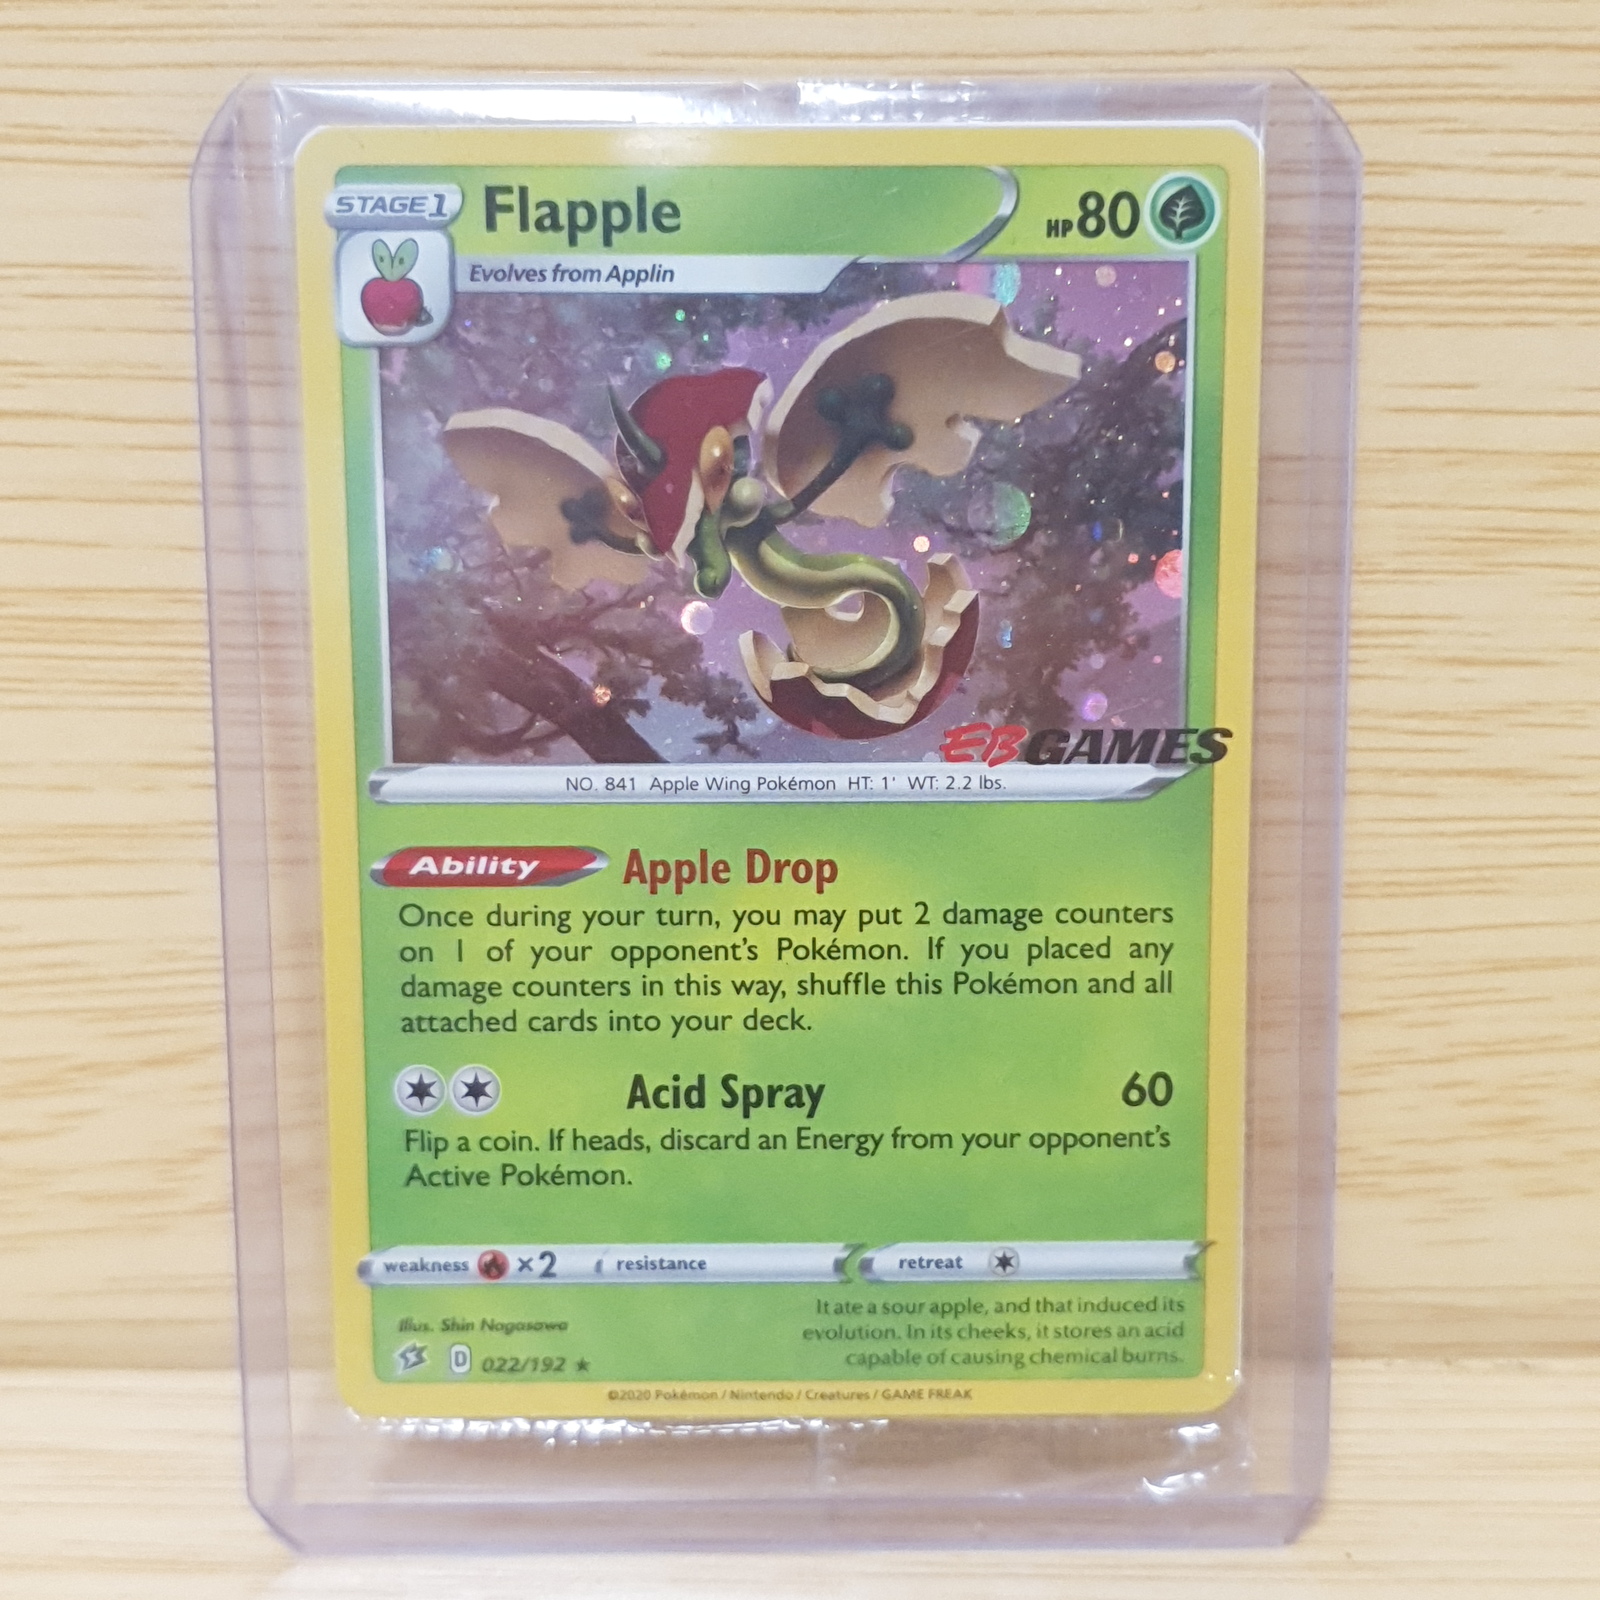 Shop the latest Pokemon Trading Cards at EB Games! - EB Games